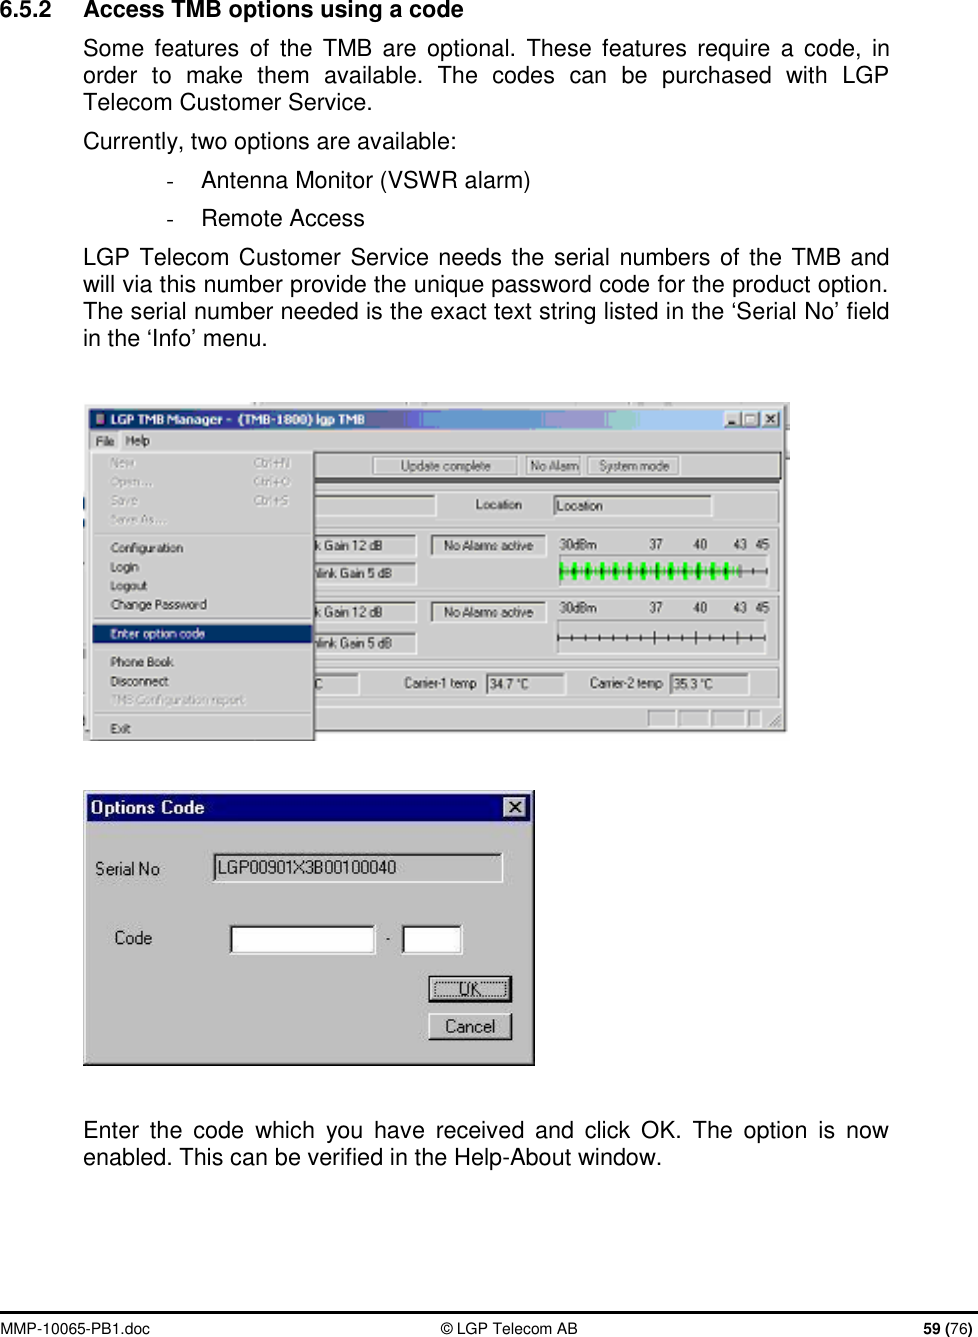  MMP-10065-PB1.doc  © LGP Telecom AB  59 (76)   6.5.2  Access TMB options using a code Some features of the TMB are optional. These features require a code, in order to make them available. The codes can be purchased with LGP Telecom Customer Service. Currently, two options are available: - Antenna Monitor (VSWR alarm) -  Remote Access LGP Telecom Customer Service needs the serial numbers of the TMB and will via this number provide the unique password code for the product option. The serial number needed is the exact text string listed in the ‘Serial No’ field in the ‘Info’ menu.      Enter the code which you have received and click OK. The option is now enabled. This can be verified in the Help-About window.   